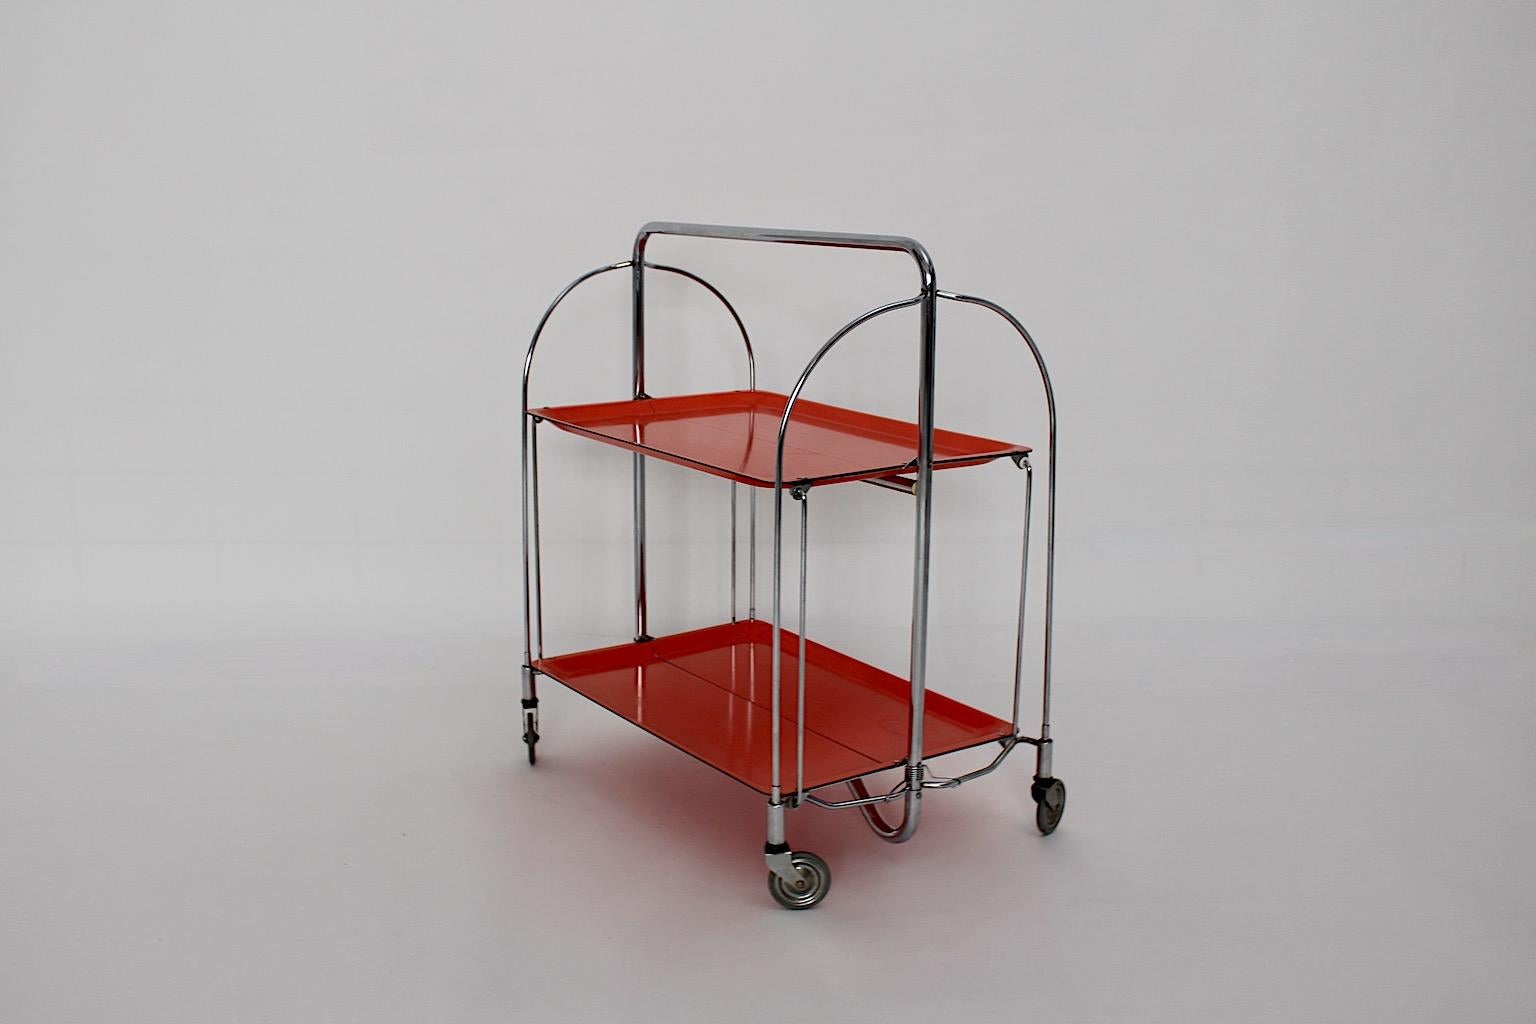 Space Age vintage serving cart or bar cart or gueridon in a happy making color tone red orange from laminate and metal.
The bar cart shows a foldable feature. For a good mobility the bar cart has 4 wheels.
Very good condition with minor signs of